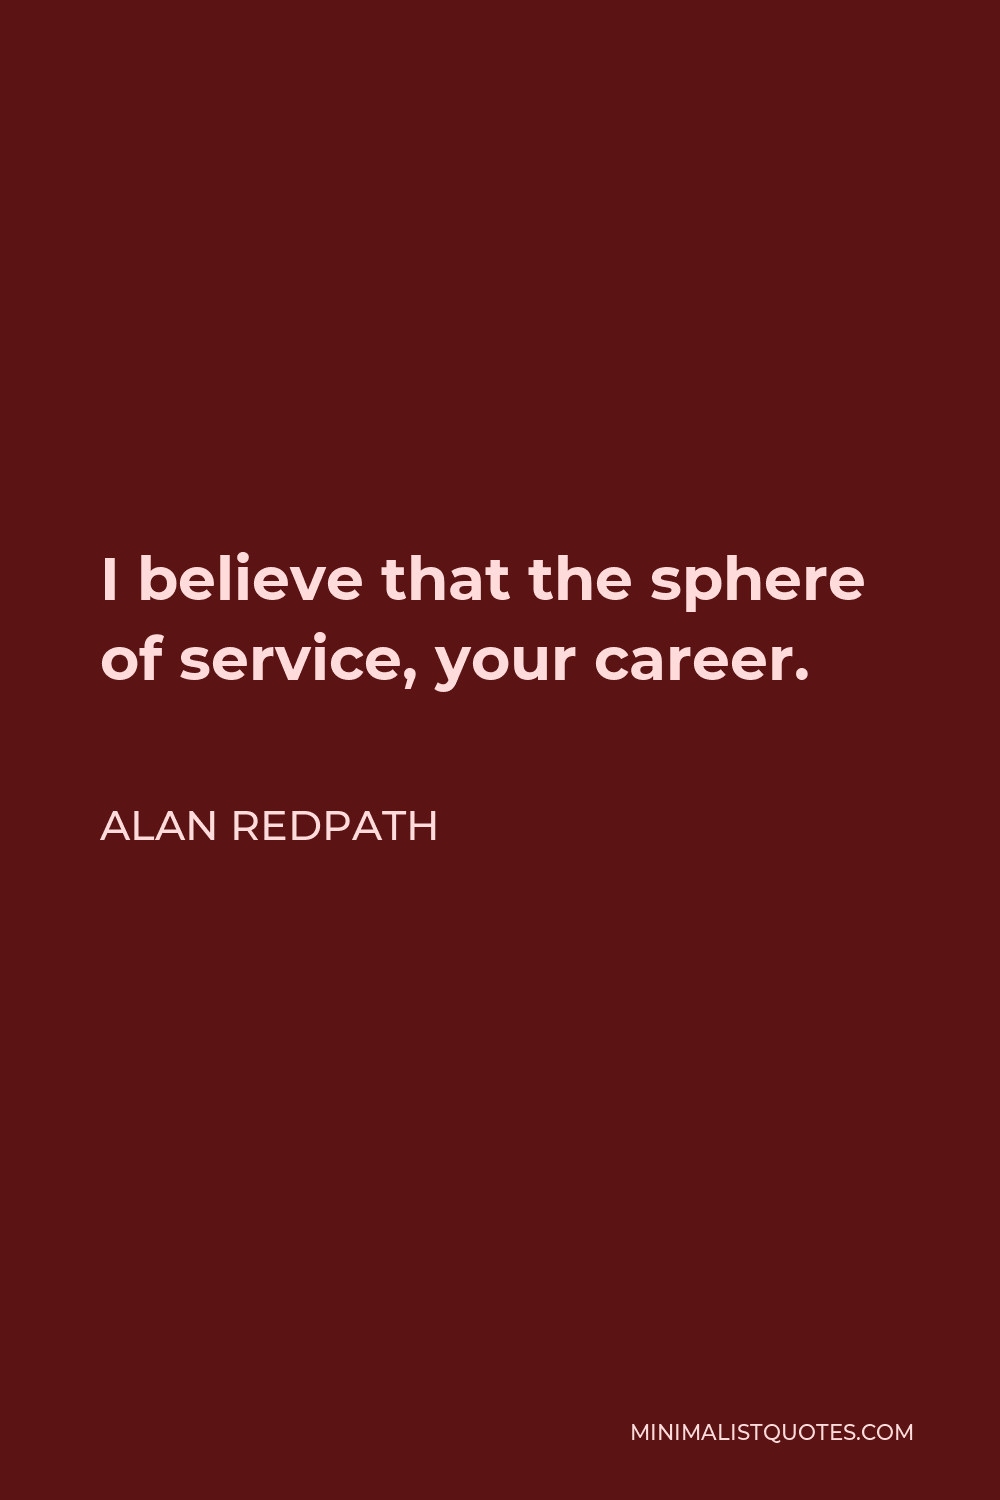 Alan Redpath Quote - I believe that the sphere of service, your career.